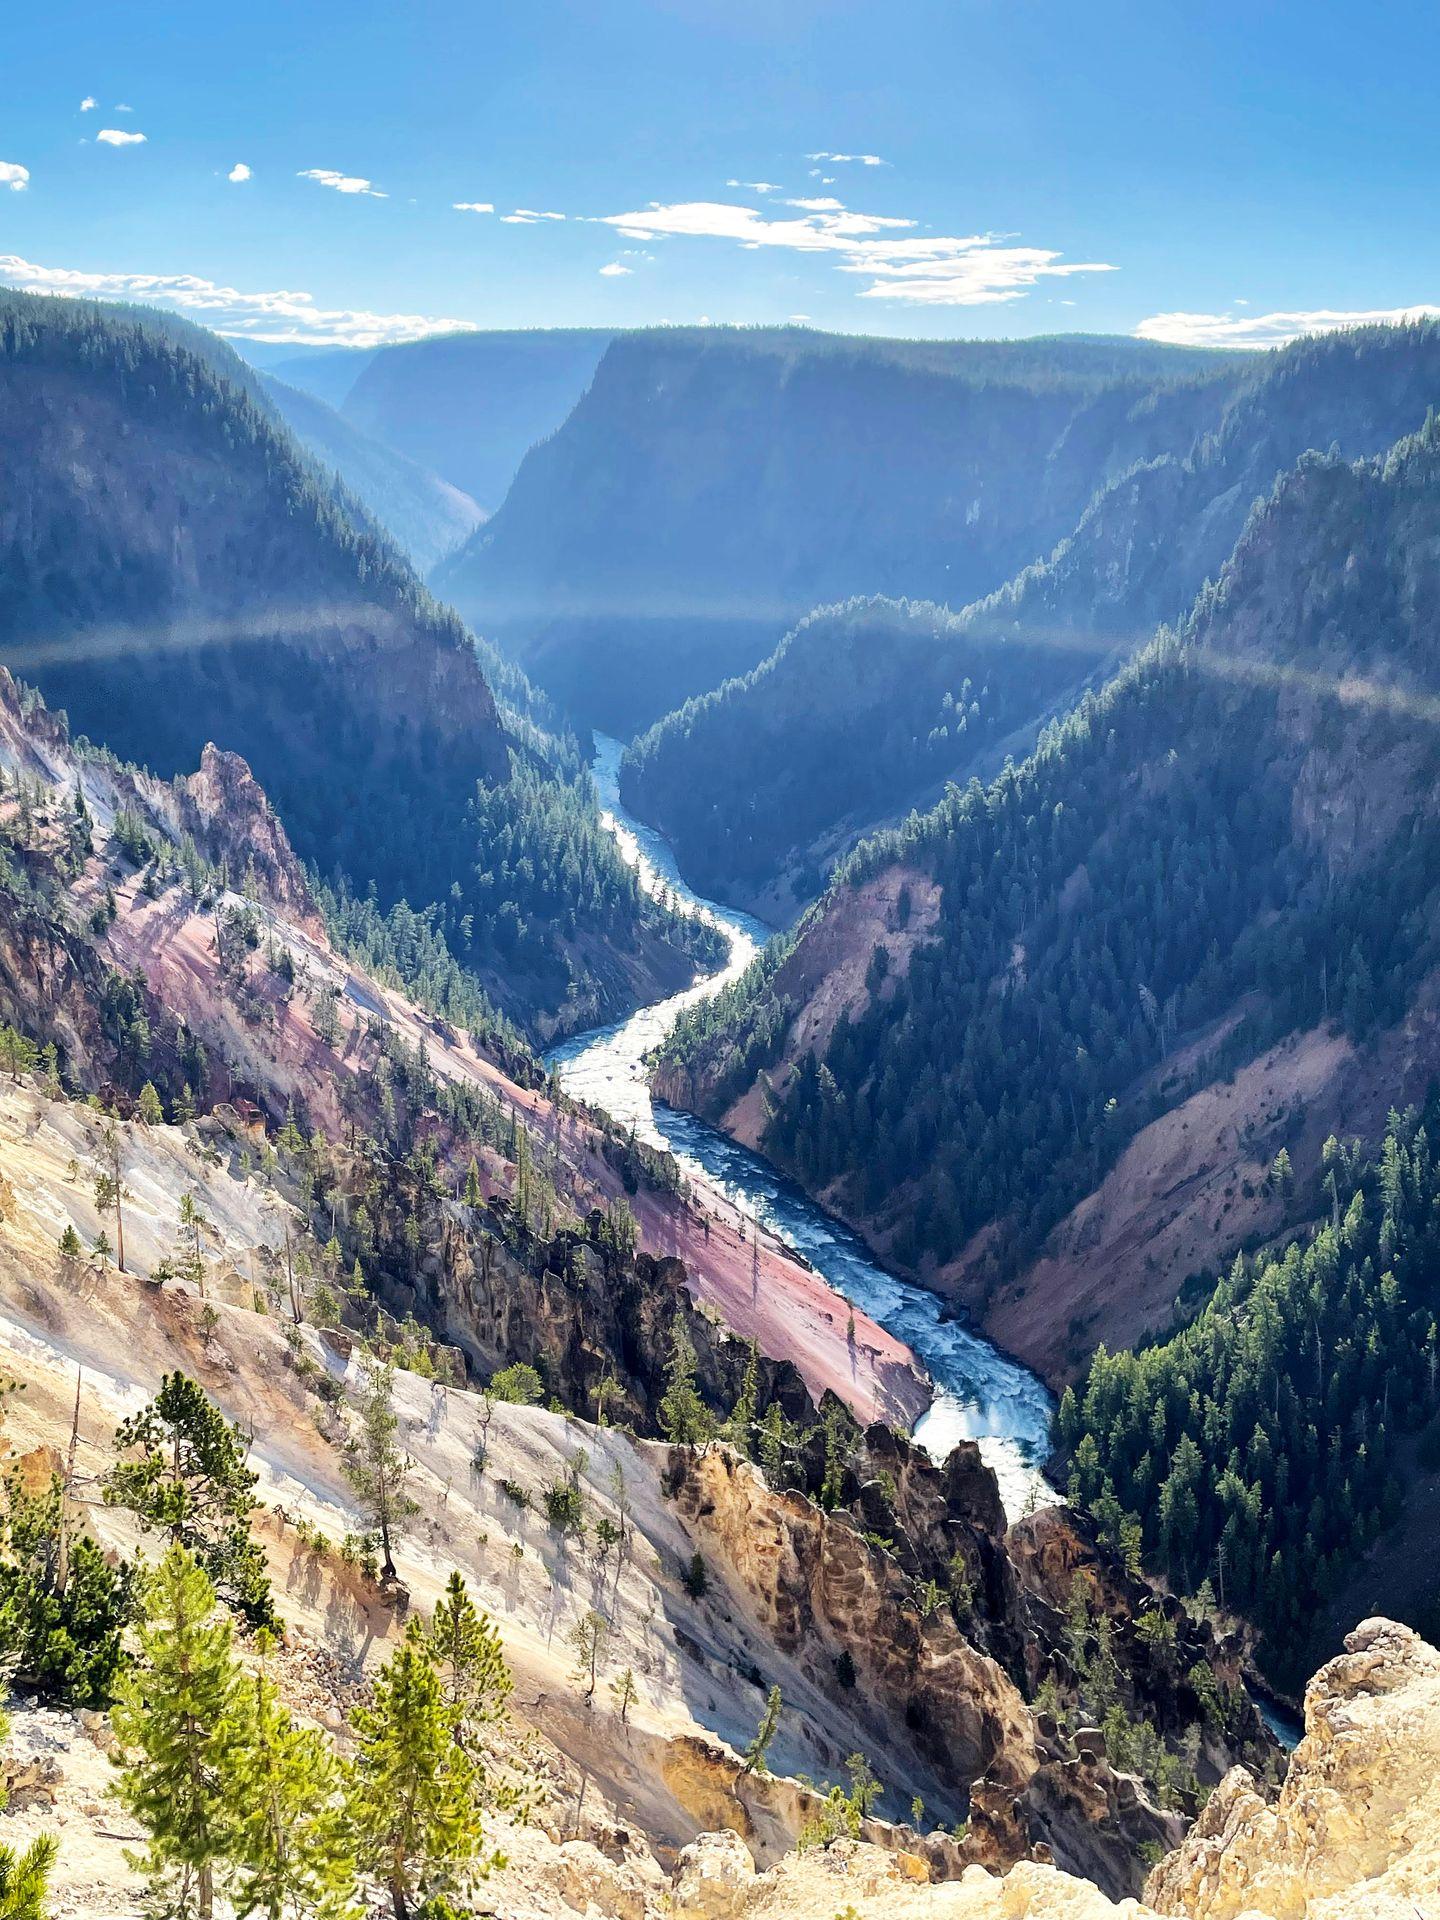 The winding river and the Grand Canyon of the Yellowstone from Inspiration Point.